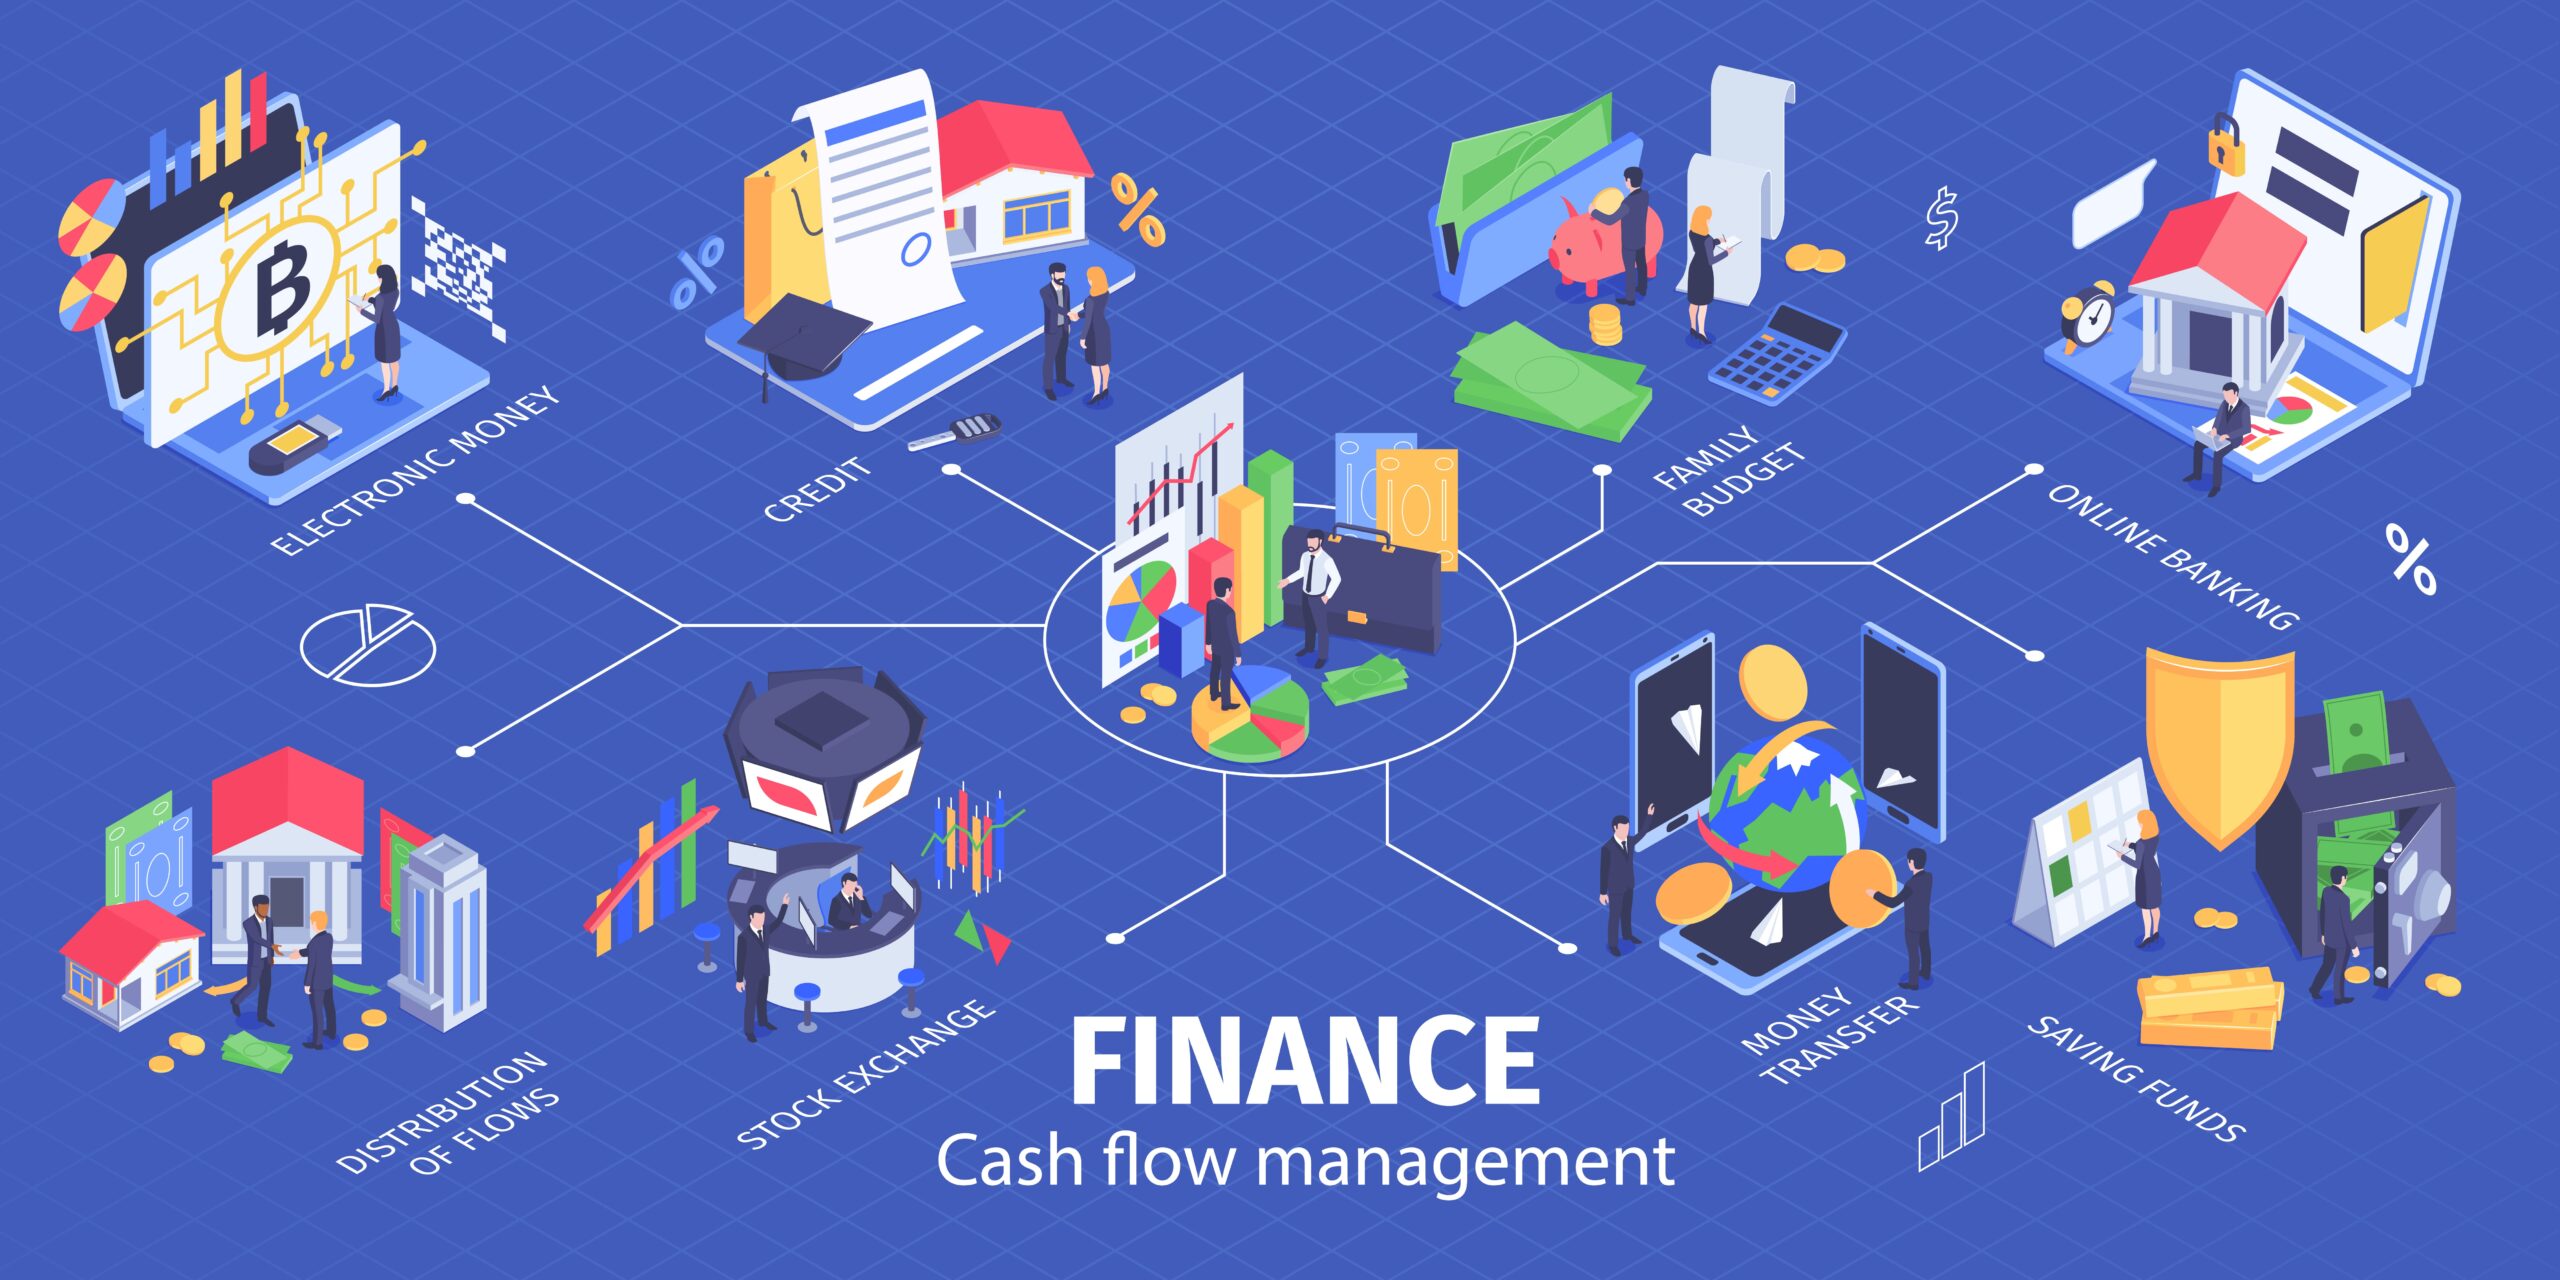 What is Cash Flow Management And Why Is It Important?